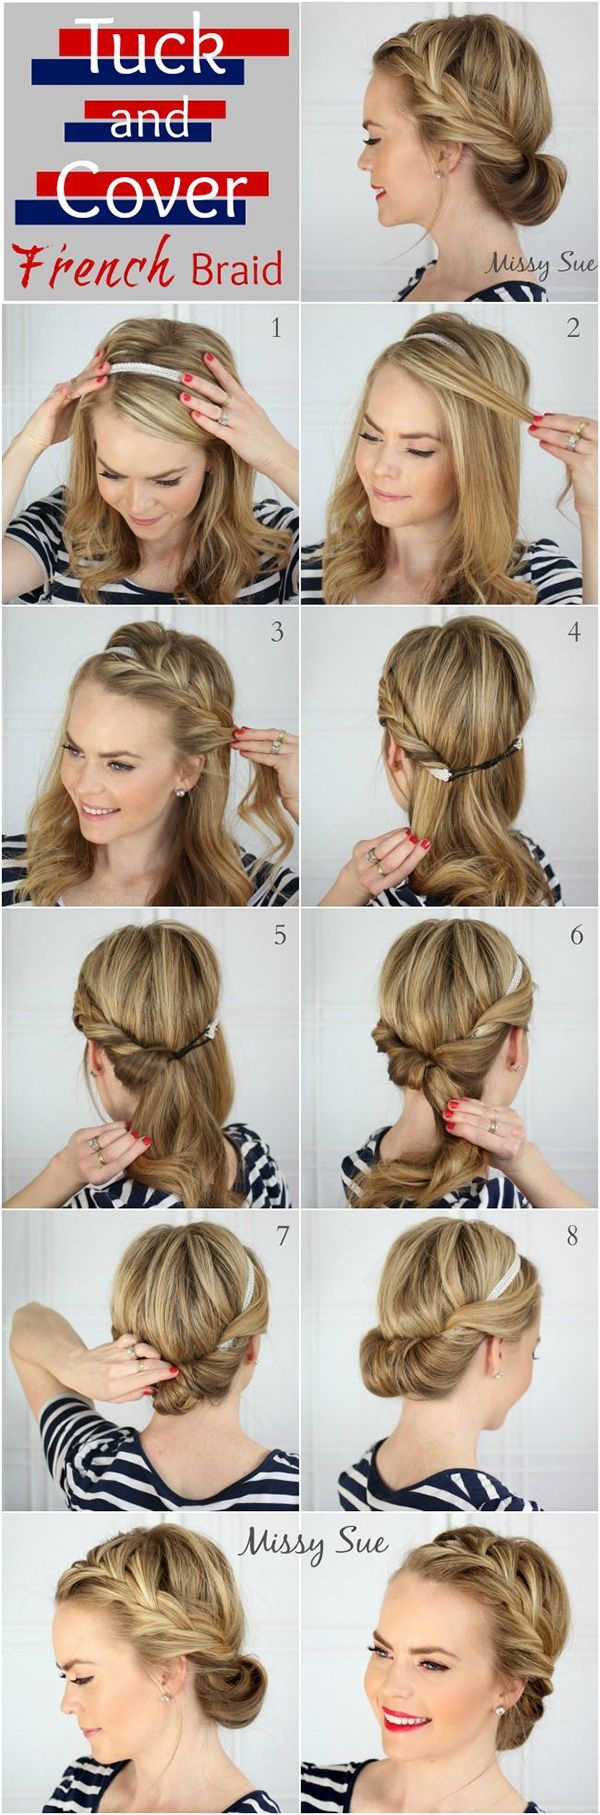 Simple Five Minute Hairstyles (63)